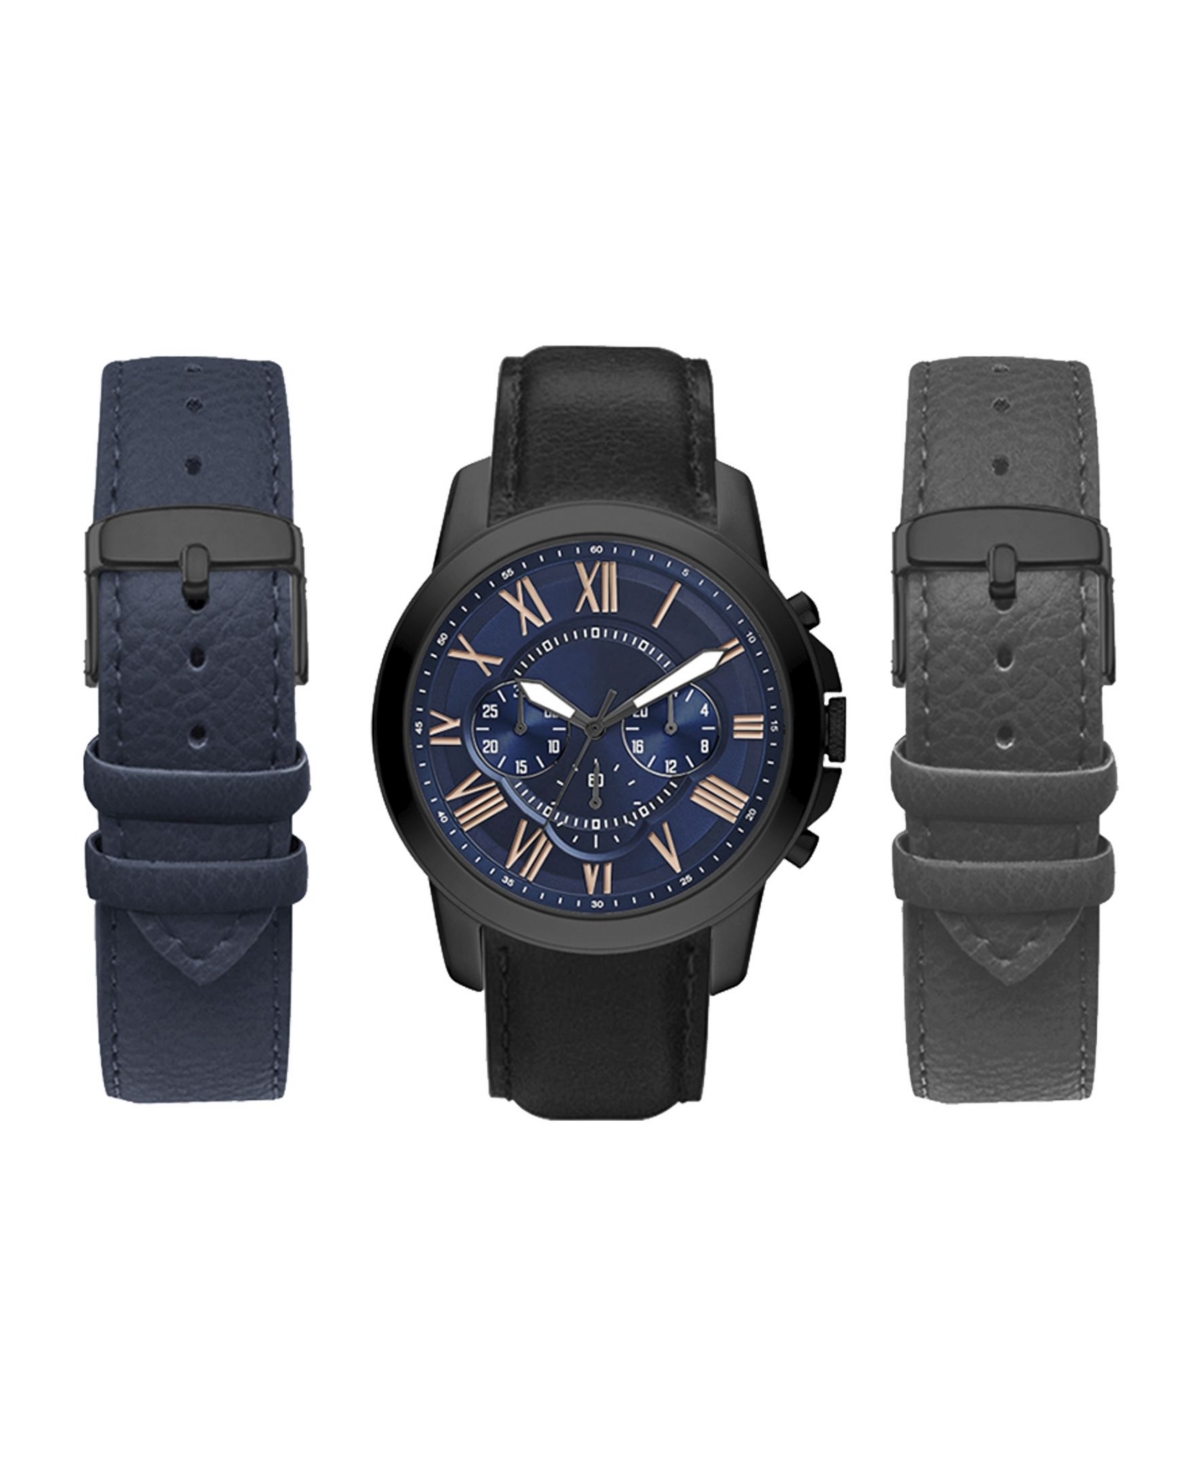 American Exchange Men's Analog Black Strap Watch 44mm with Black, Gray and Navy Interchangeable Straps Set